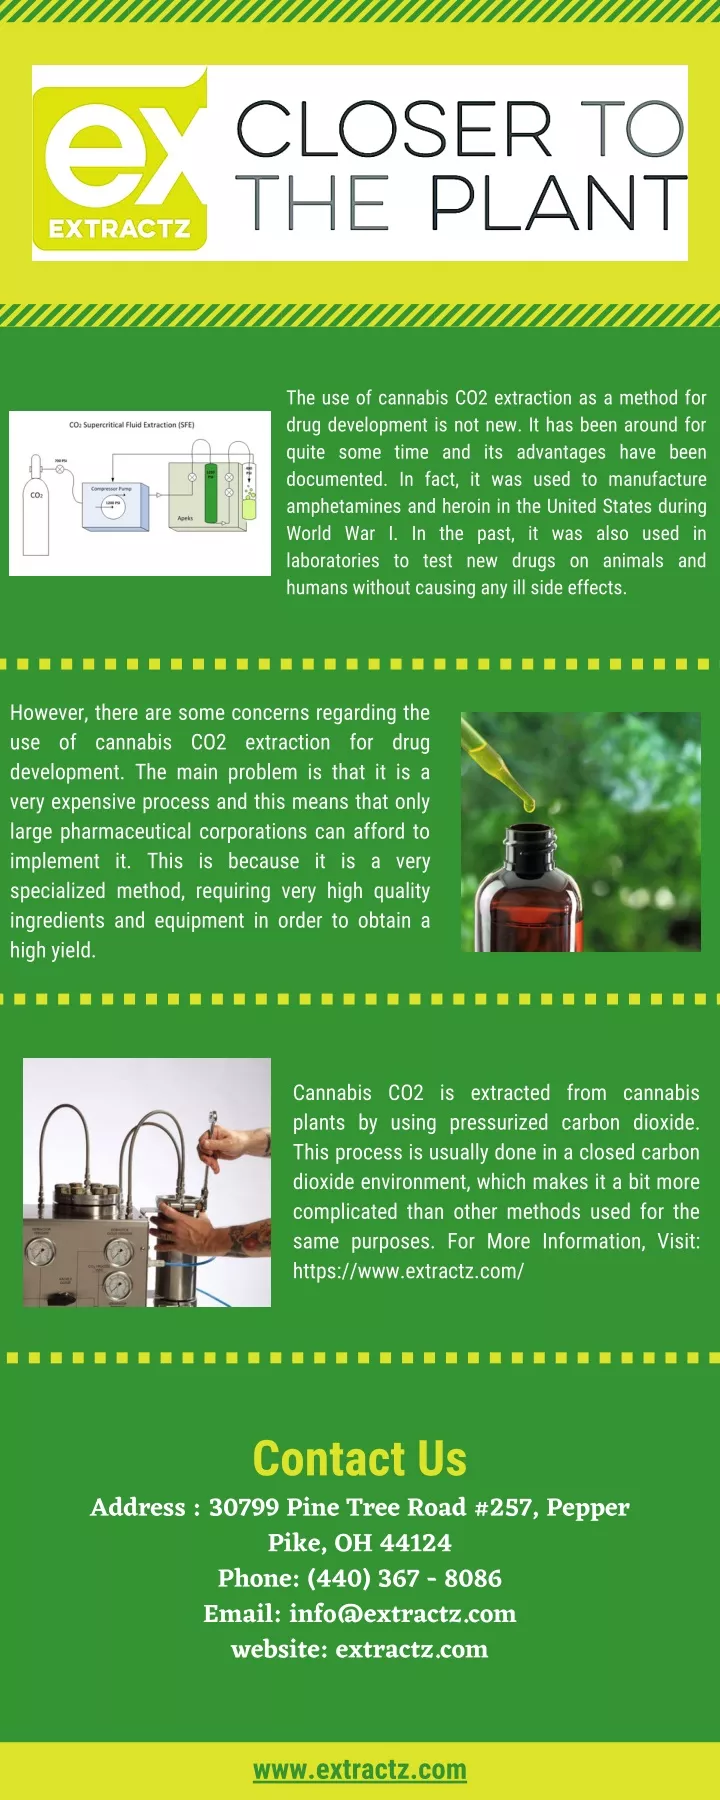 the use of cannabis co2 extraction as a method